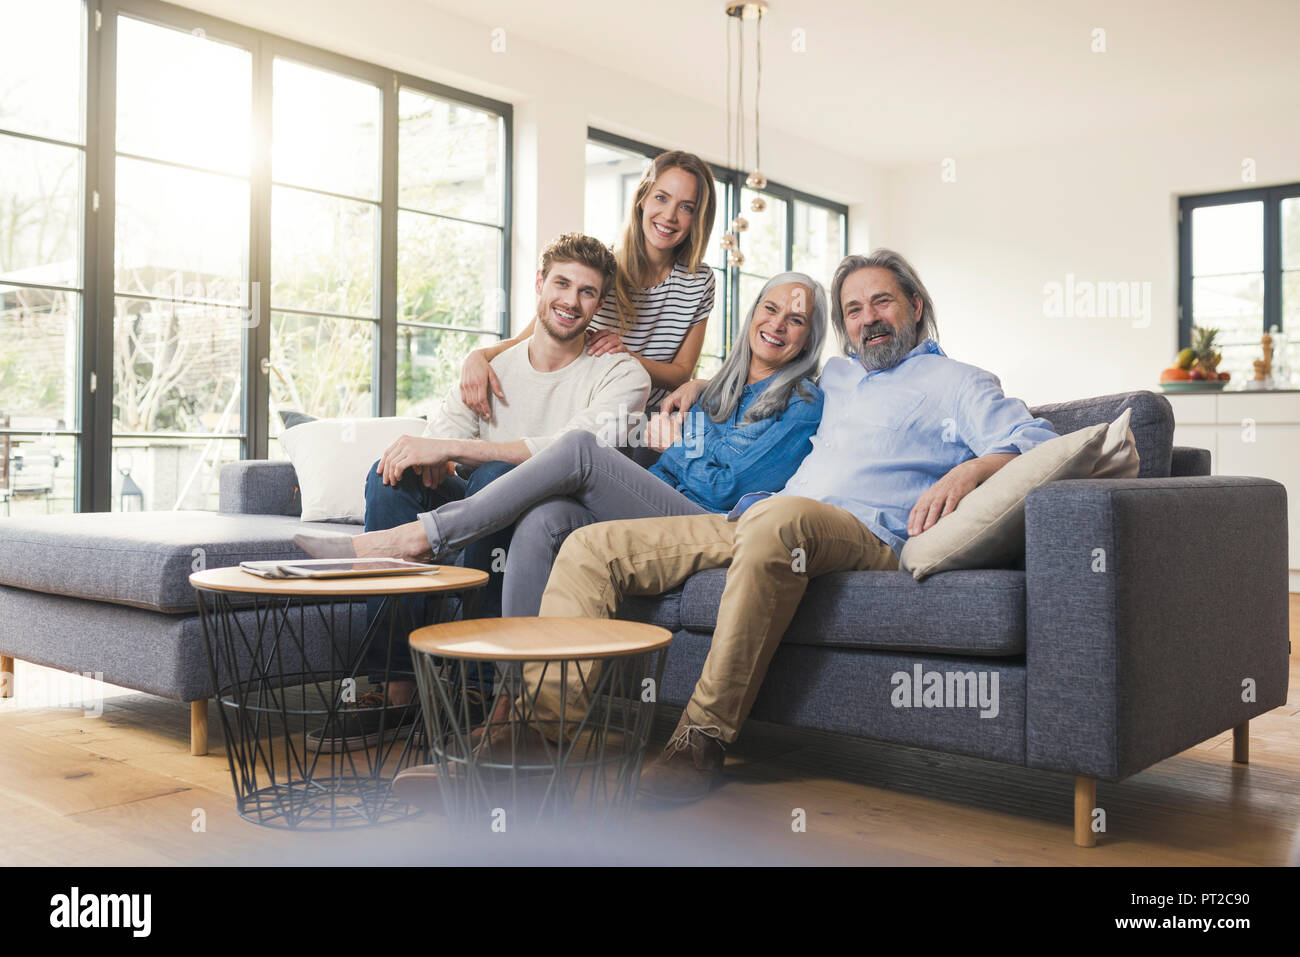 Senior couple with family sitting on couch Banque D'Images